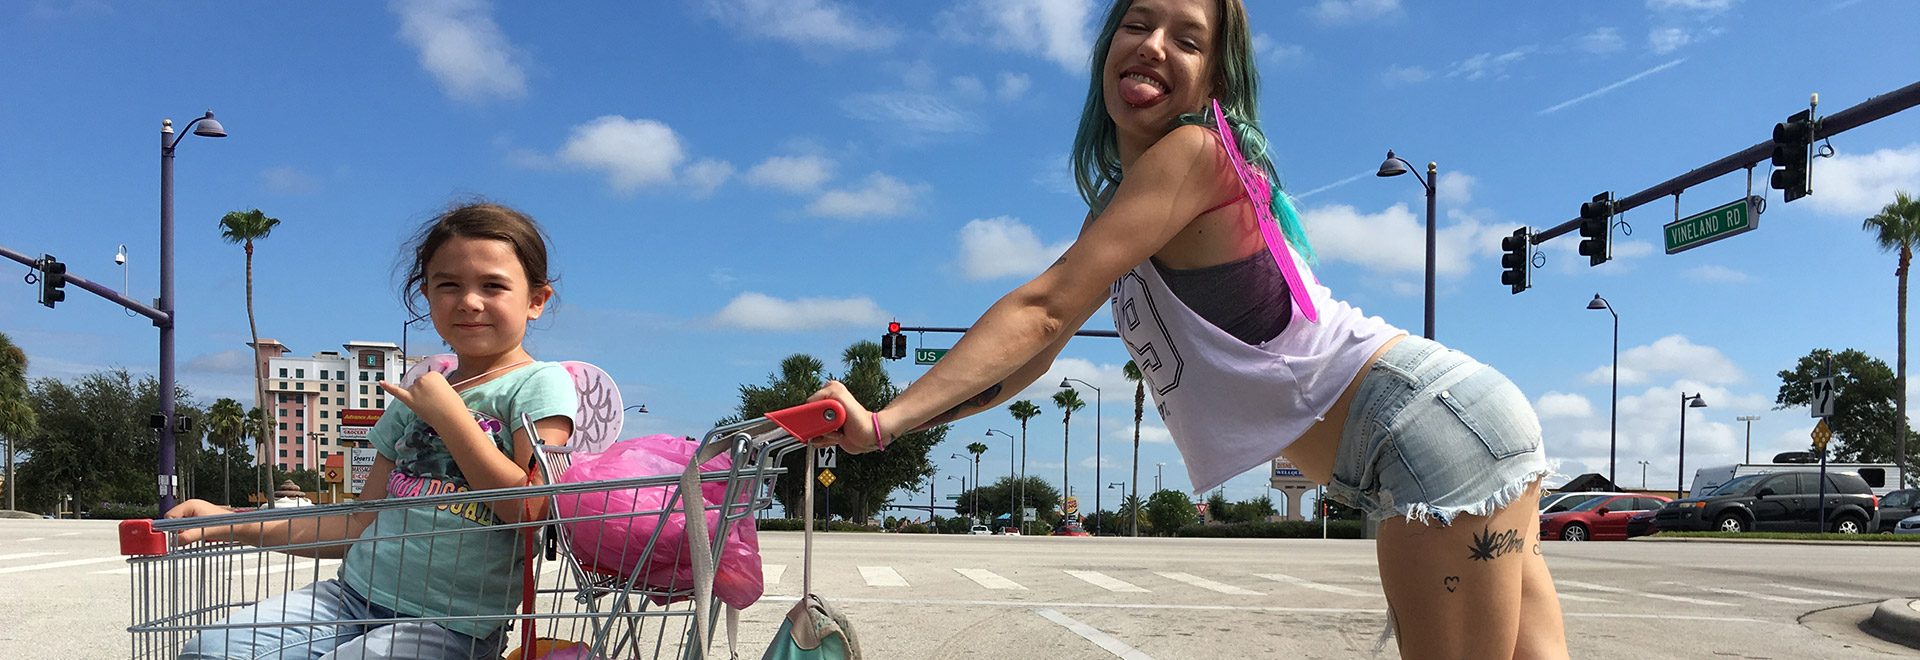 The Florida Project - A purely authentic slice of life